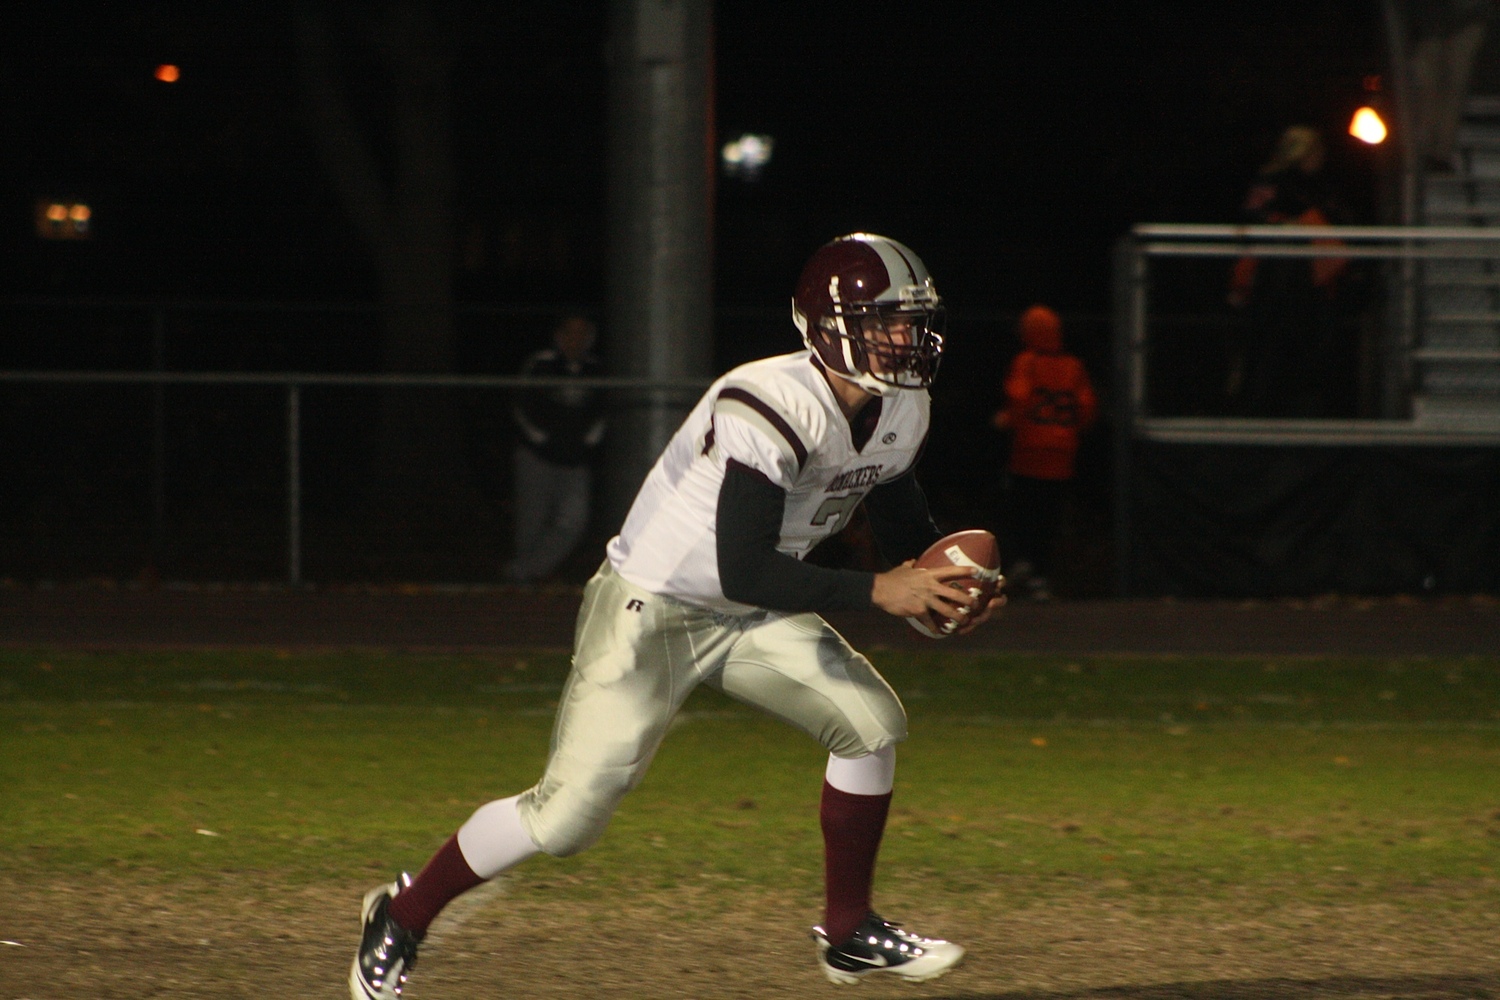 Cortland Heneveld was the quarterback of the Bonackers during their last playoff season in 2013.   CAILIN RILEY